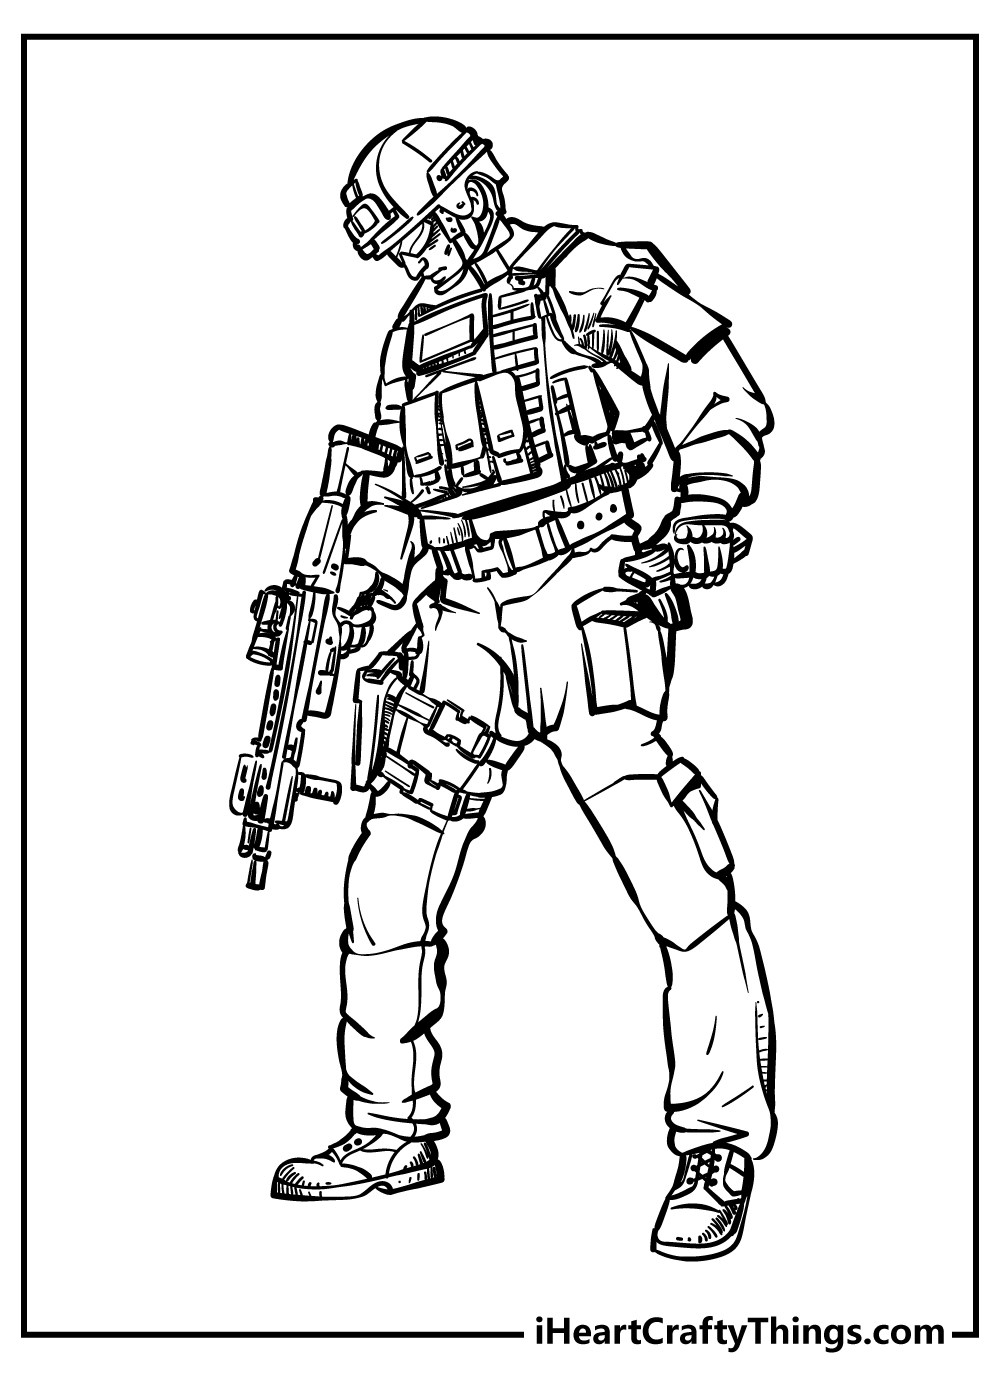 Army Coloring Pages free pdf download